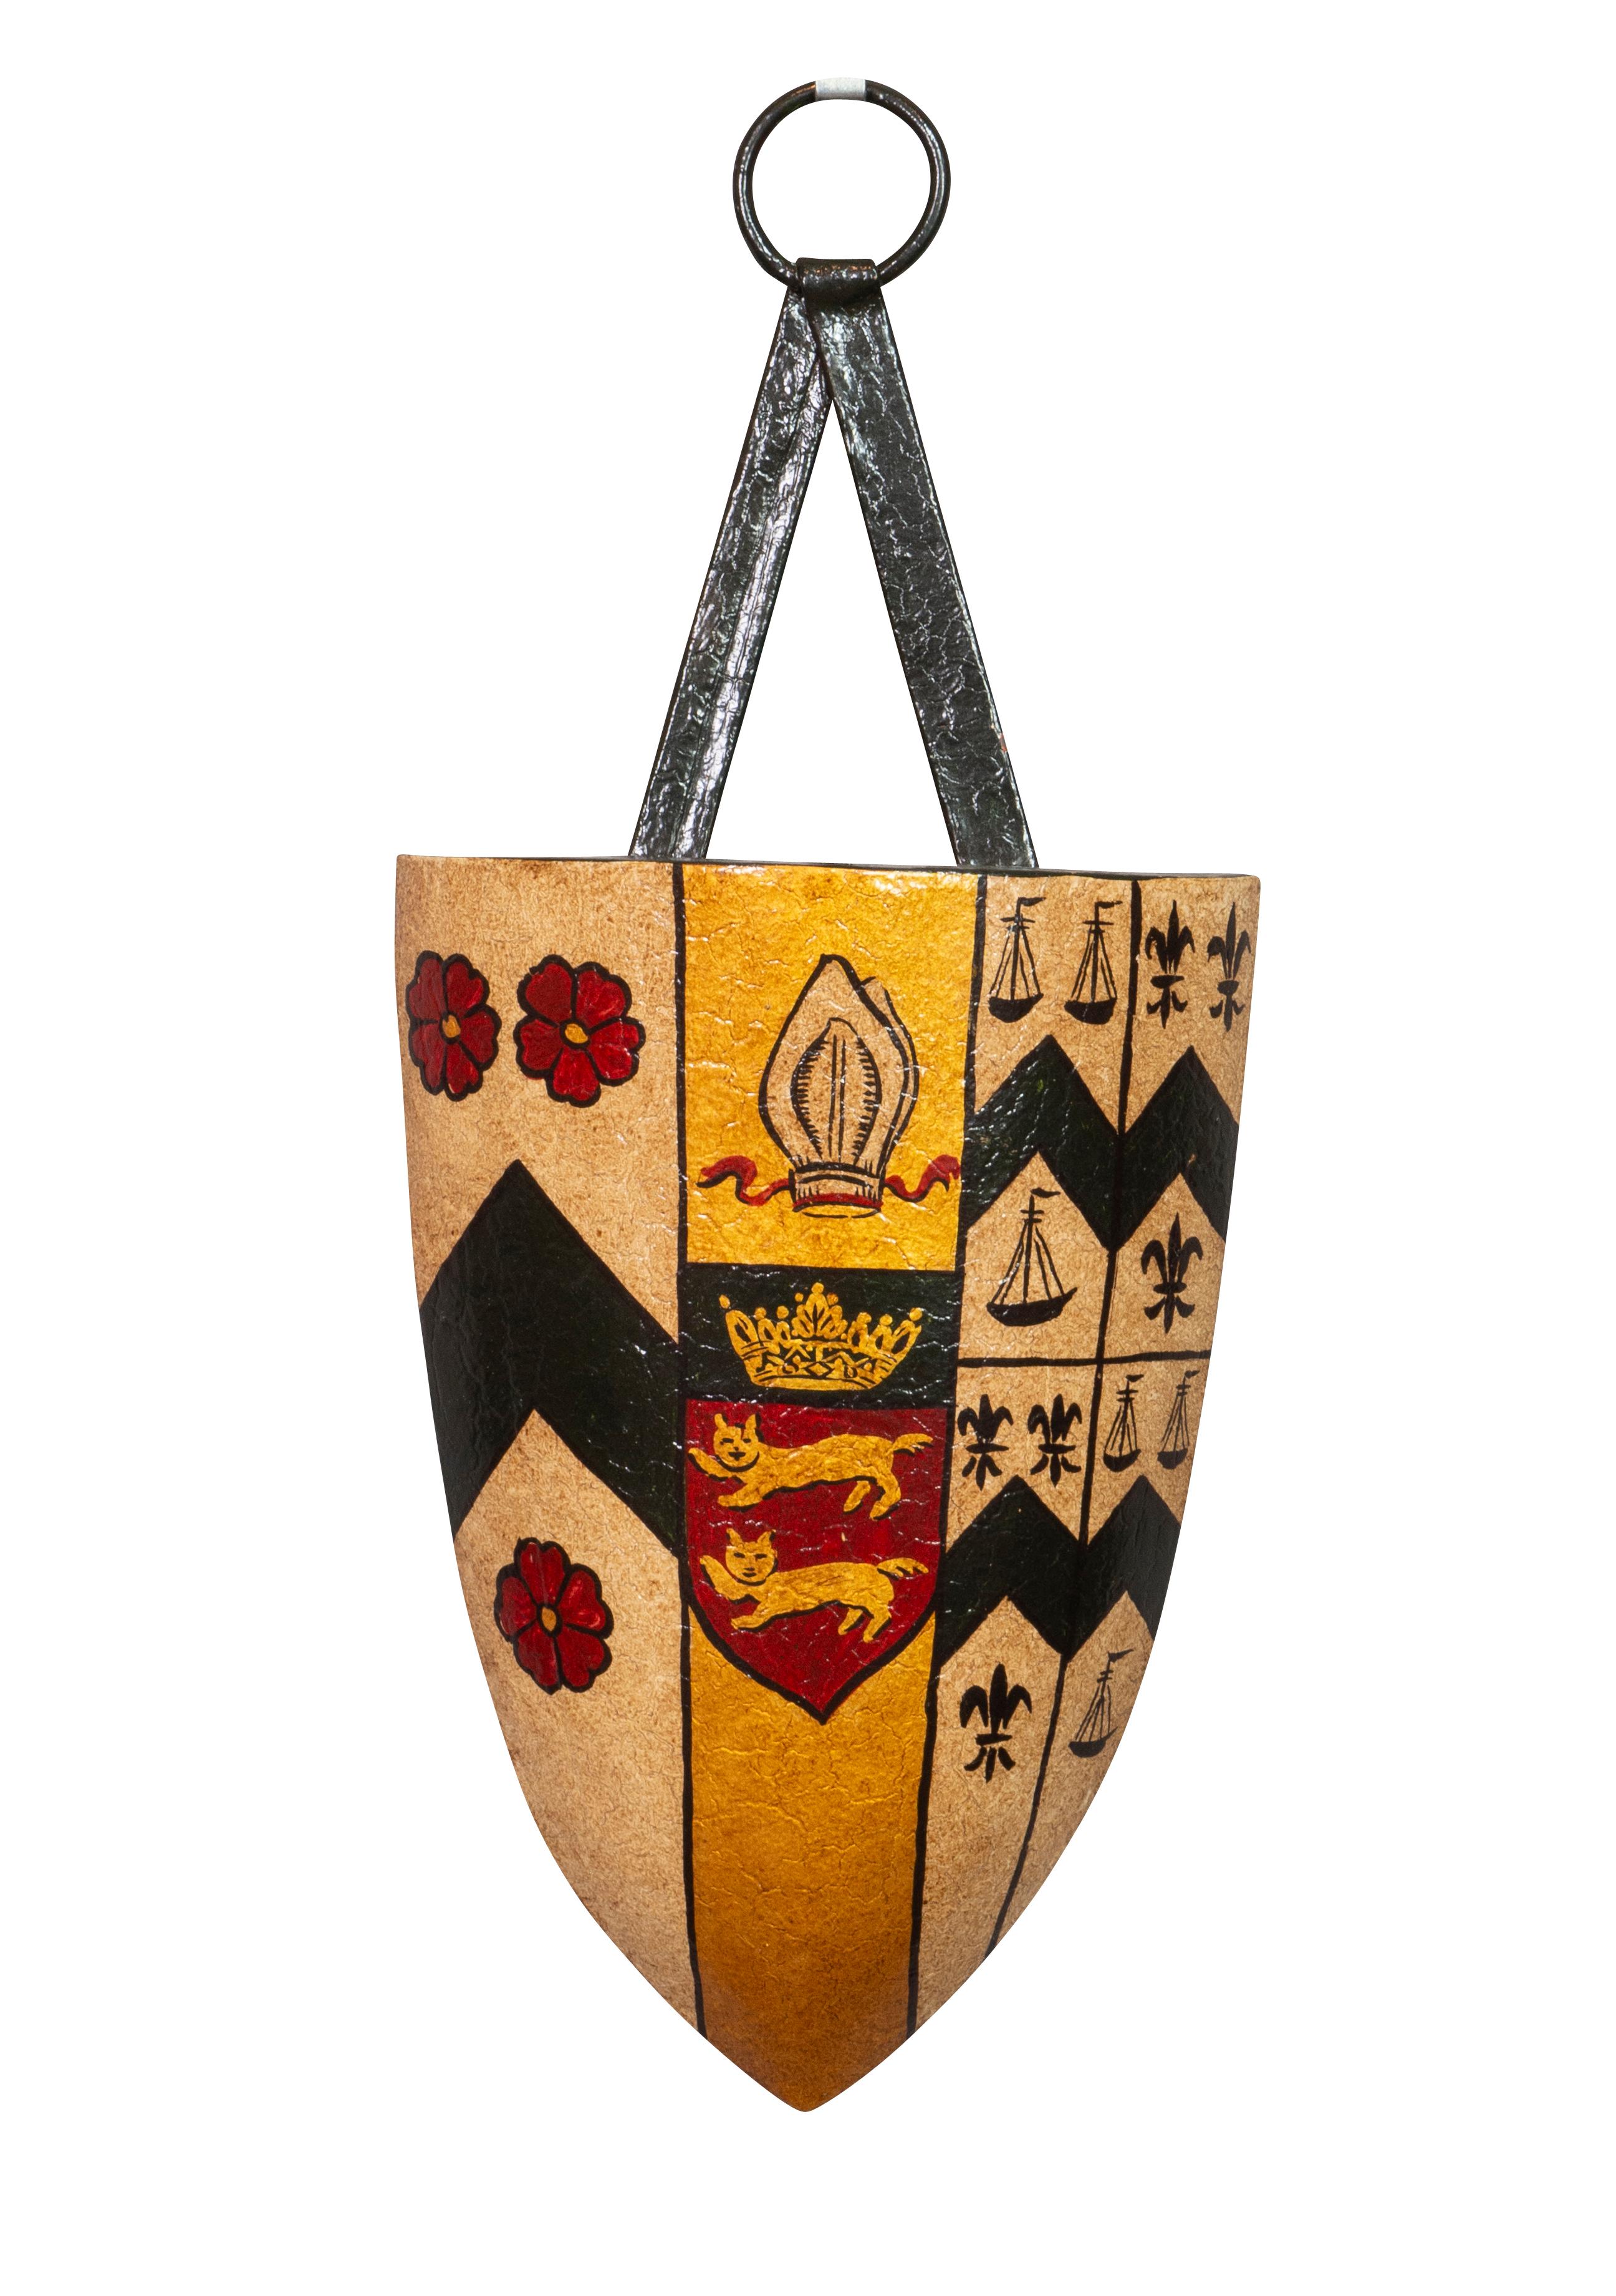 Each of shield shape with tole strap and ring featuring different coats of arms and family crests.